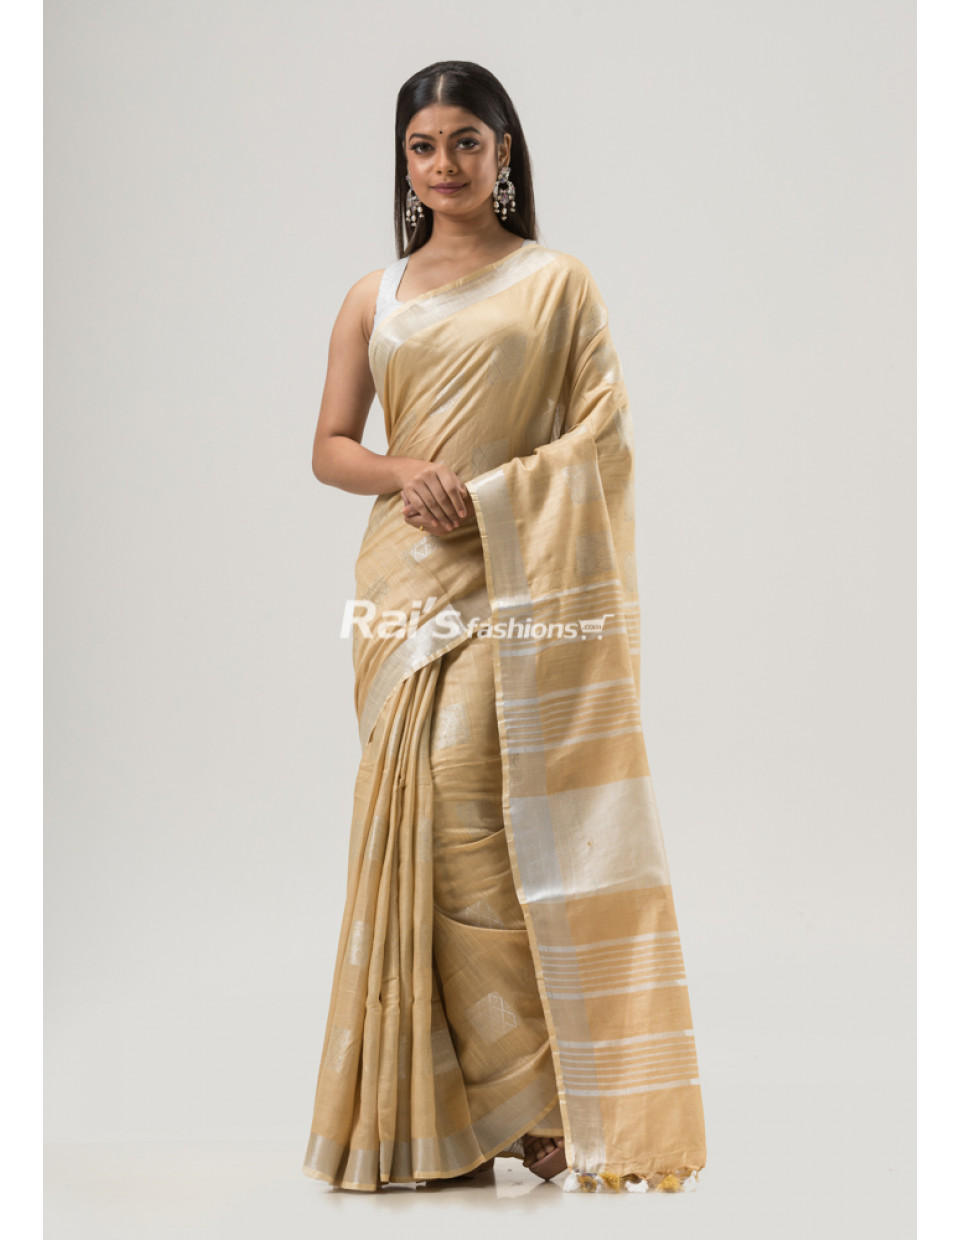 All Over Silver Butta Worked Cotton Slab Saree (KR1634)